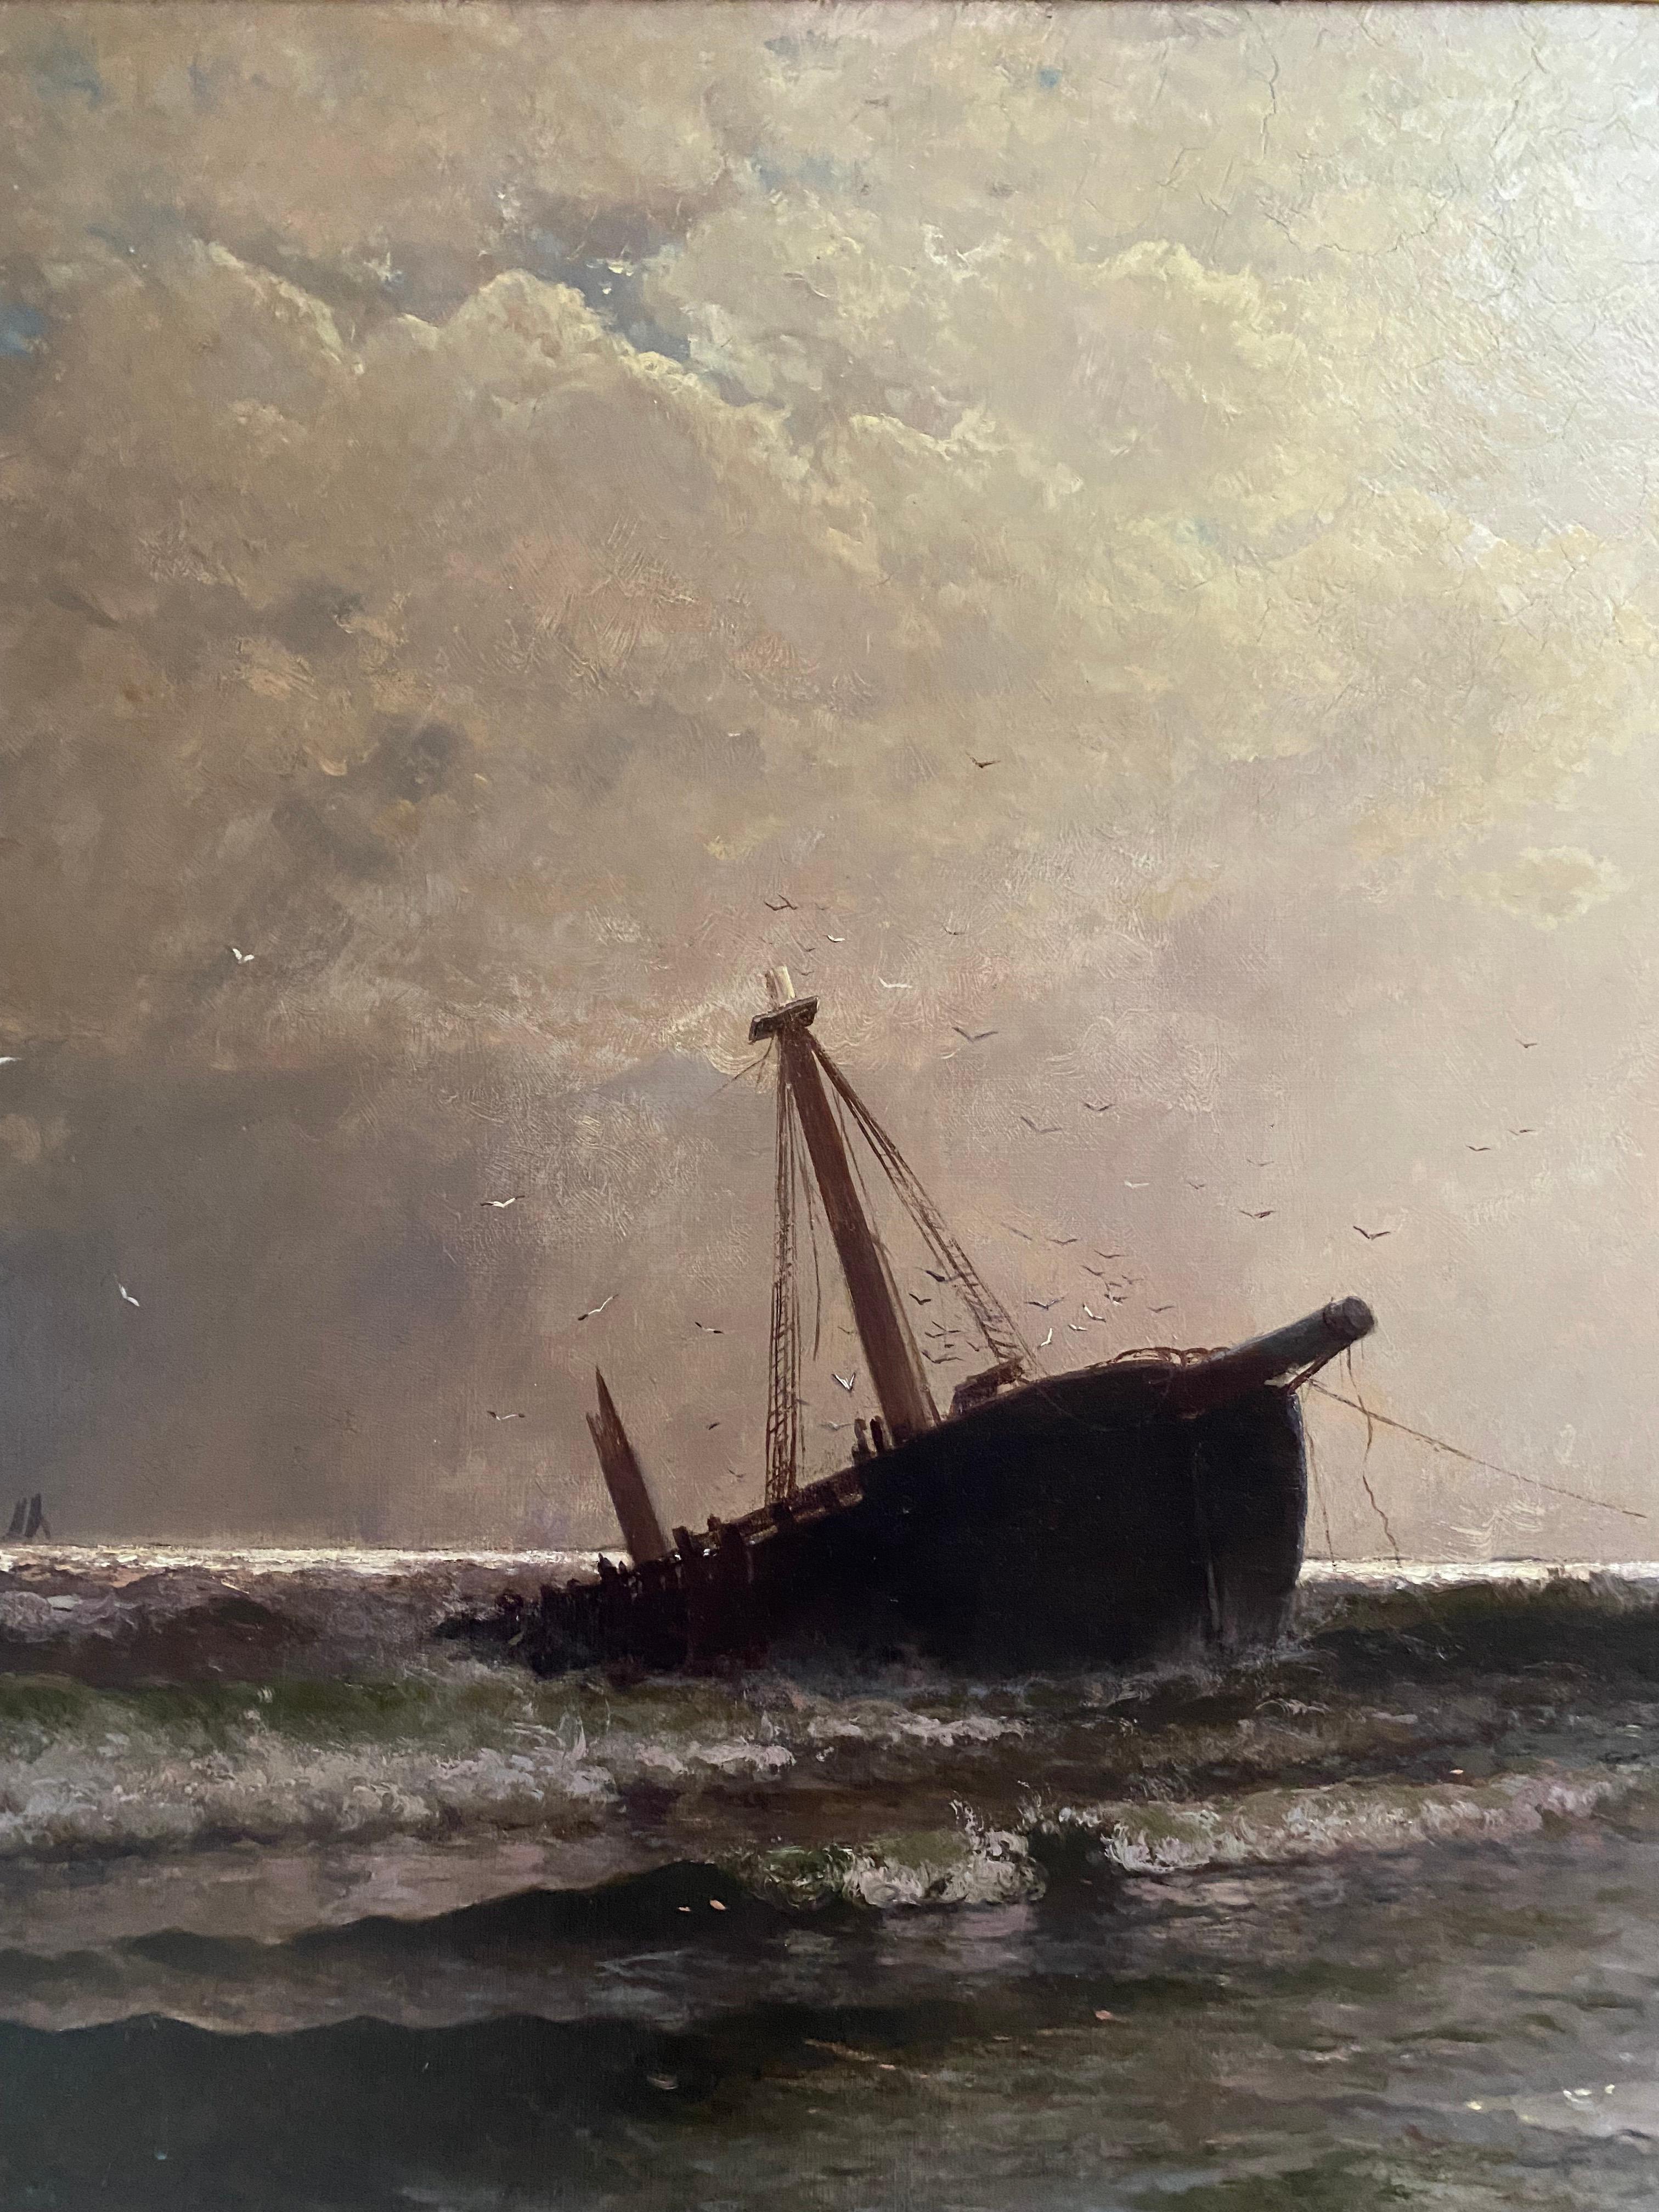 Under a Divided Sky, Seascape of Shipwreck - Hudson River School Painting by Alfred Thompson Bricher